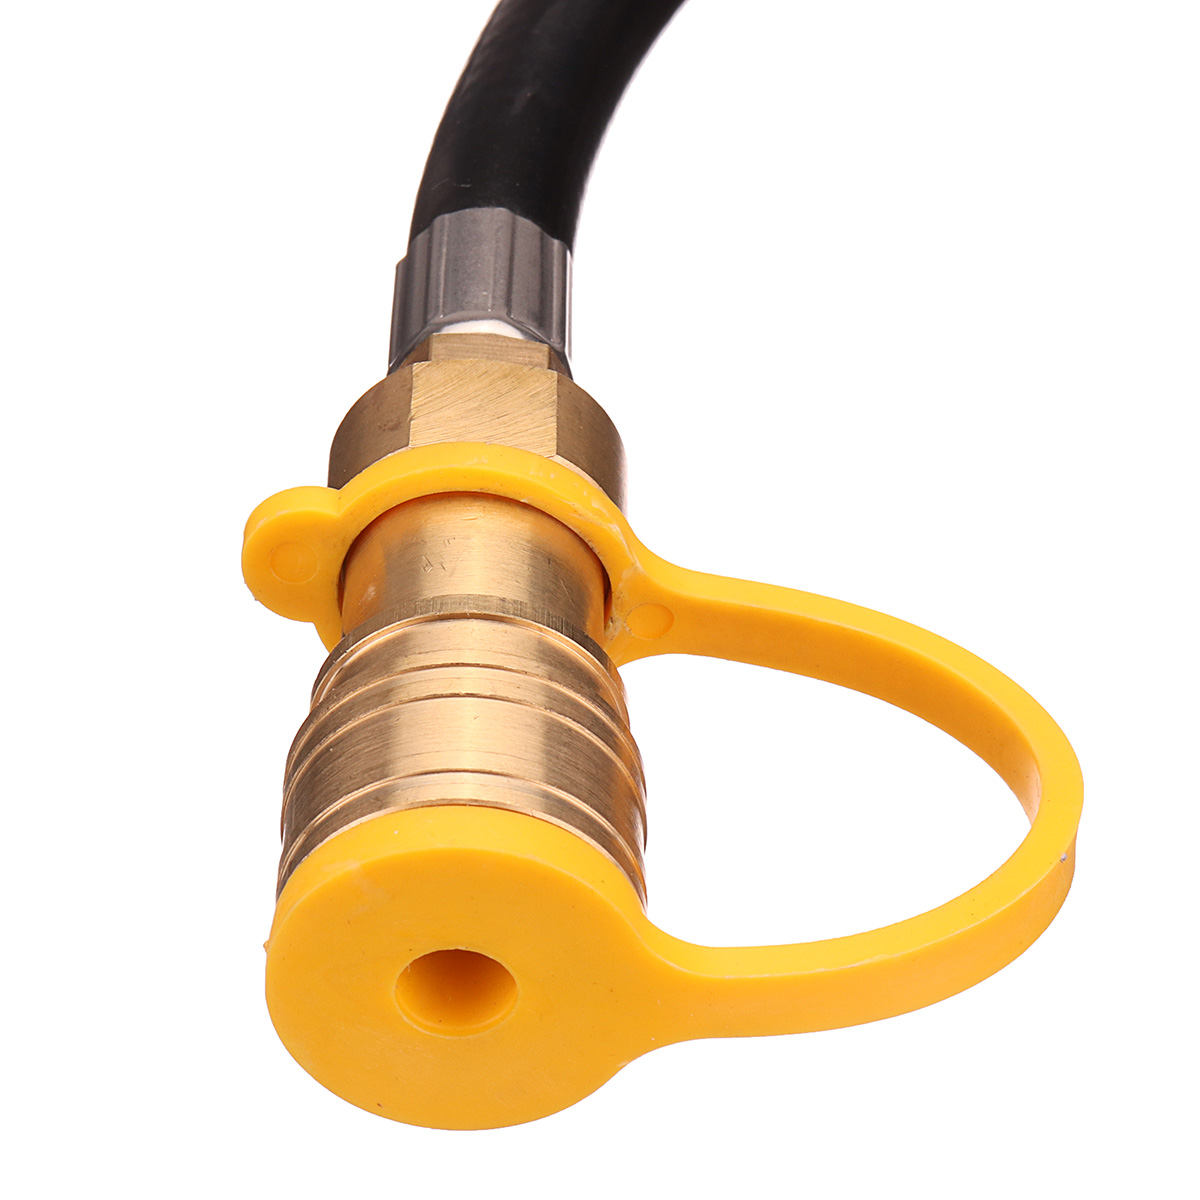 12inch-Propane-Adapter-Hose-Adapter-Converter-38-Female-Replacement-For-Reducing-Valve-366-Meter-1543377-4